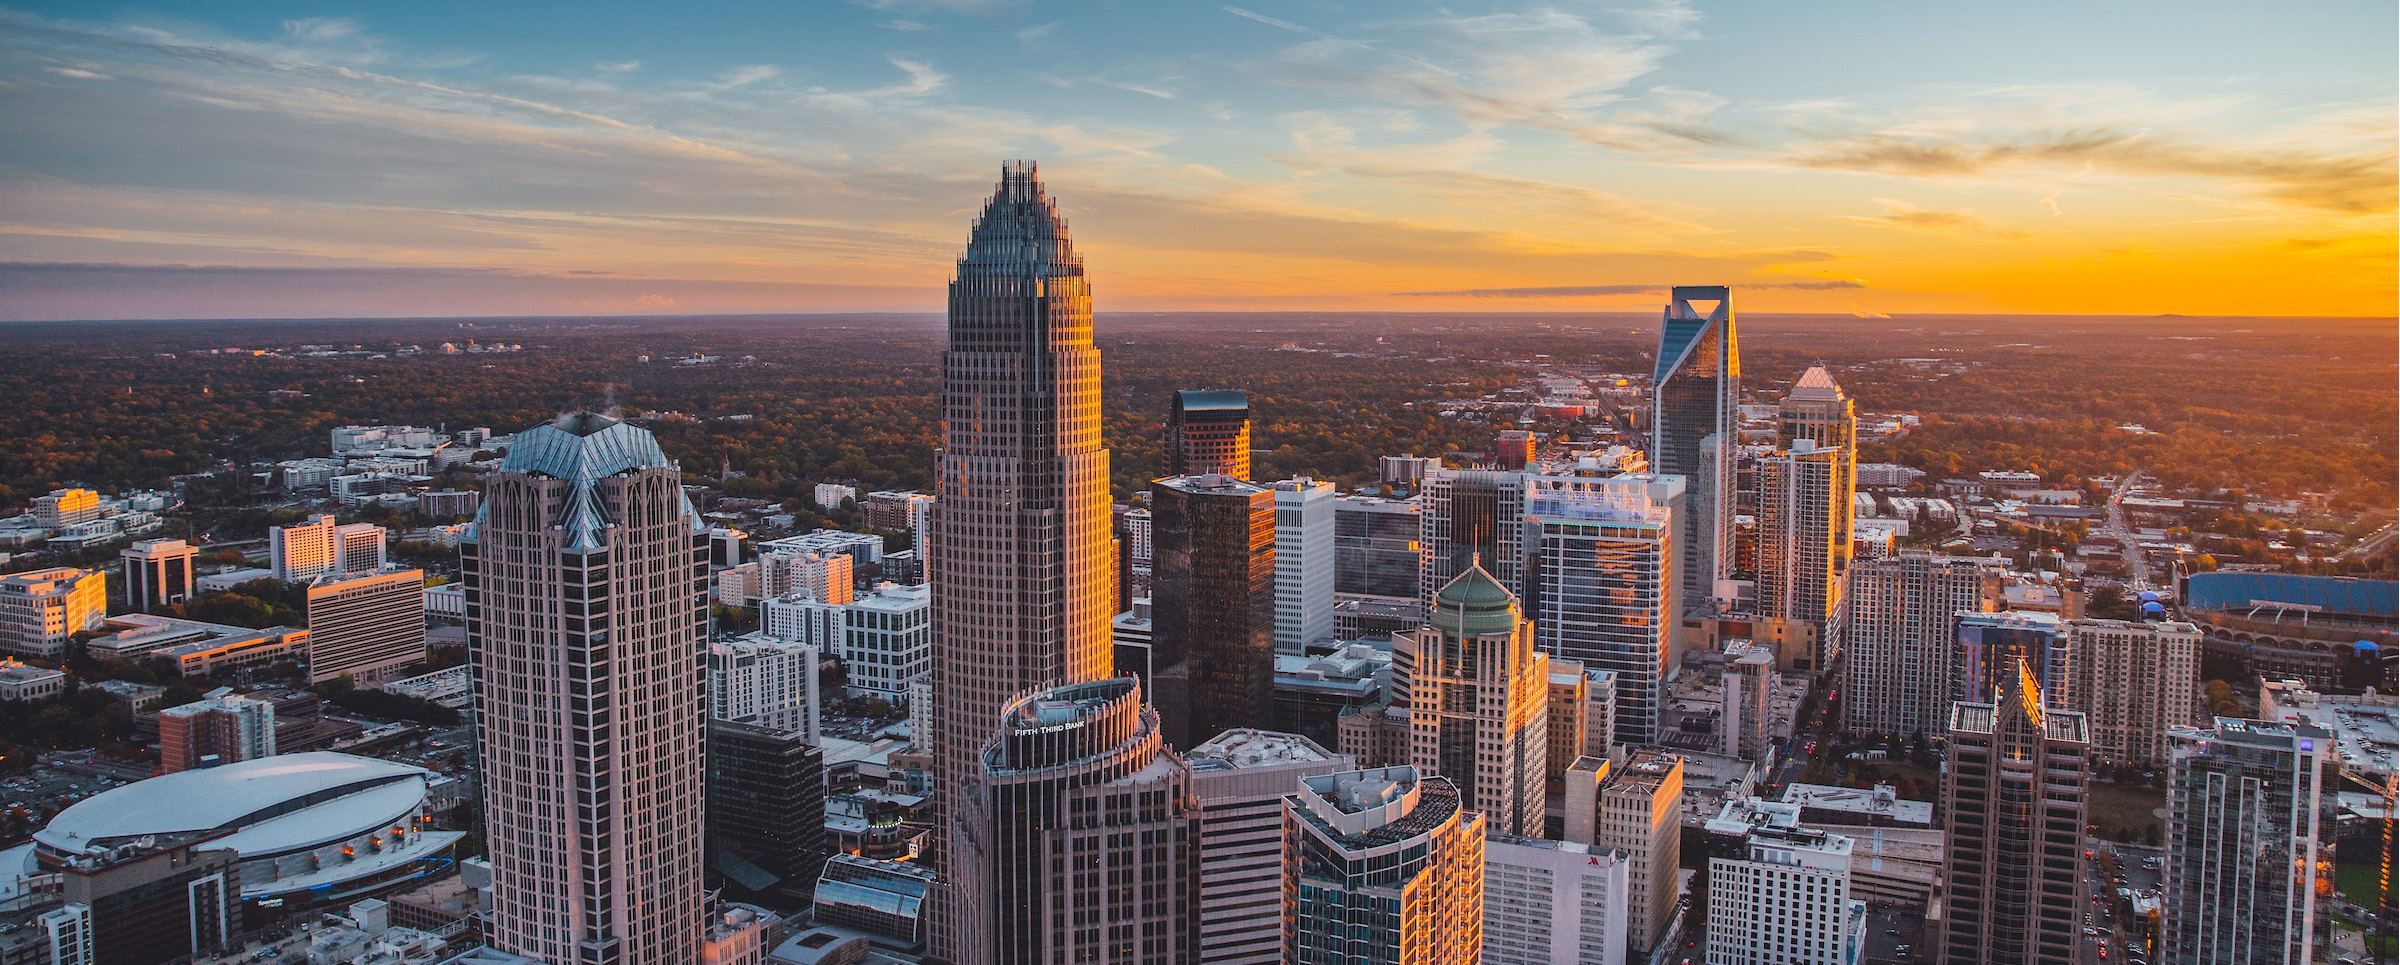  The United Methodist General Conference will be held April 23 – May 3, 2024, at Charlotte Convention Center in Charlotte, North Carolina. Logo updated 5-2023. Image of Charlotte, North Carolina skyline at sunset courtesy of CharlottesGotaLot.com.